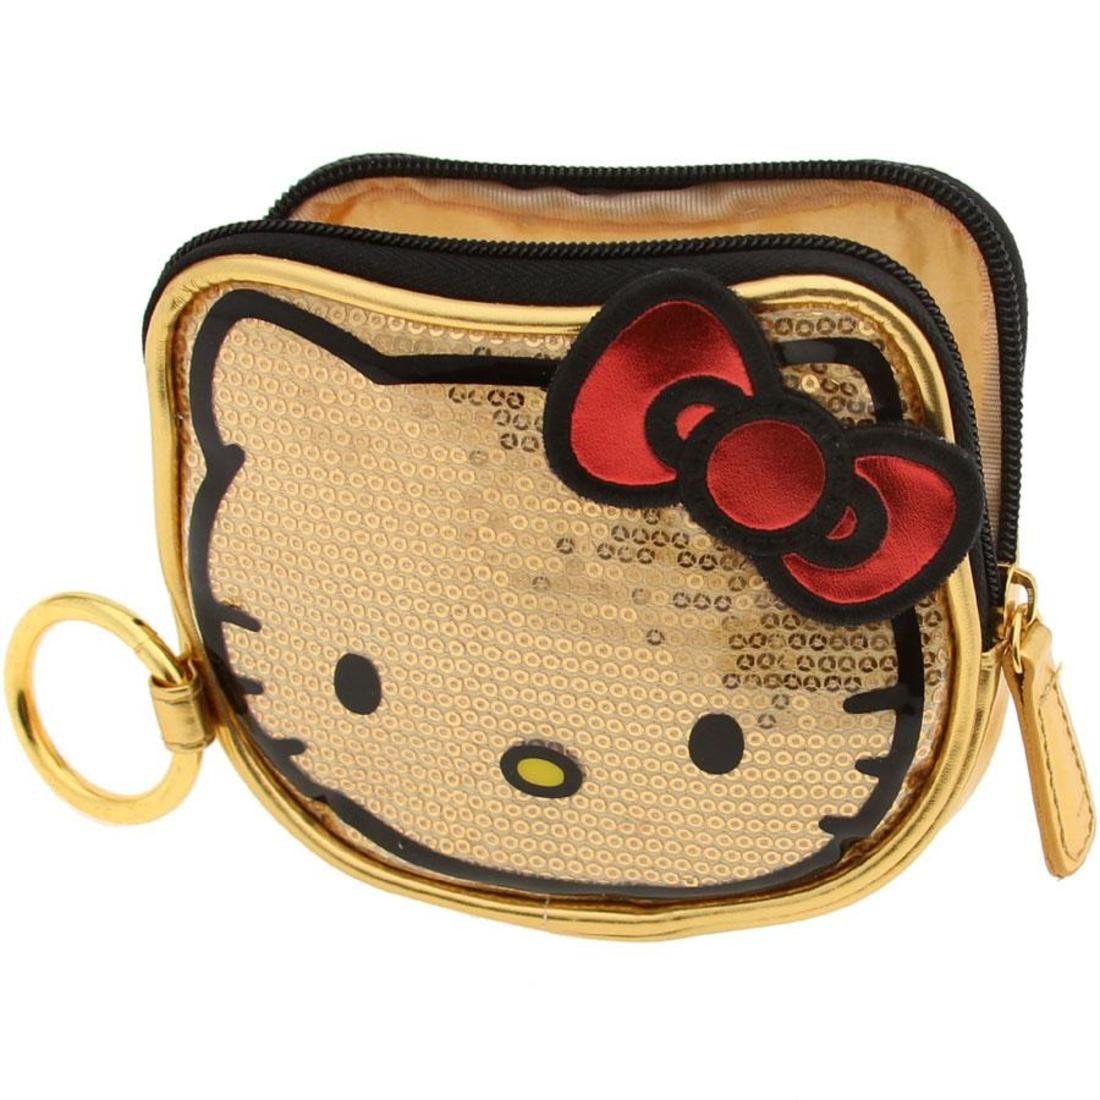 Japan Sanrio - Sanrio Forest Animal Collection x Hello Kitty Pouch —  USShoppingSOS